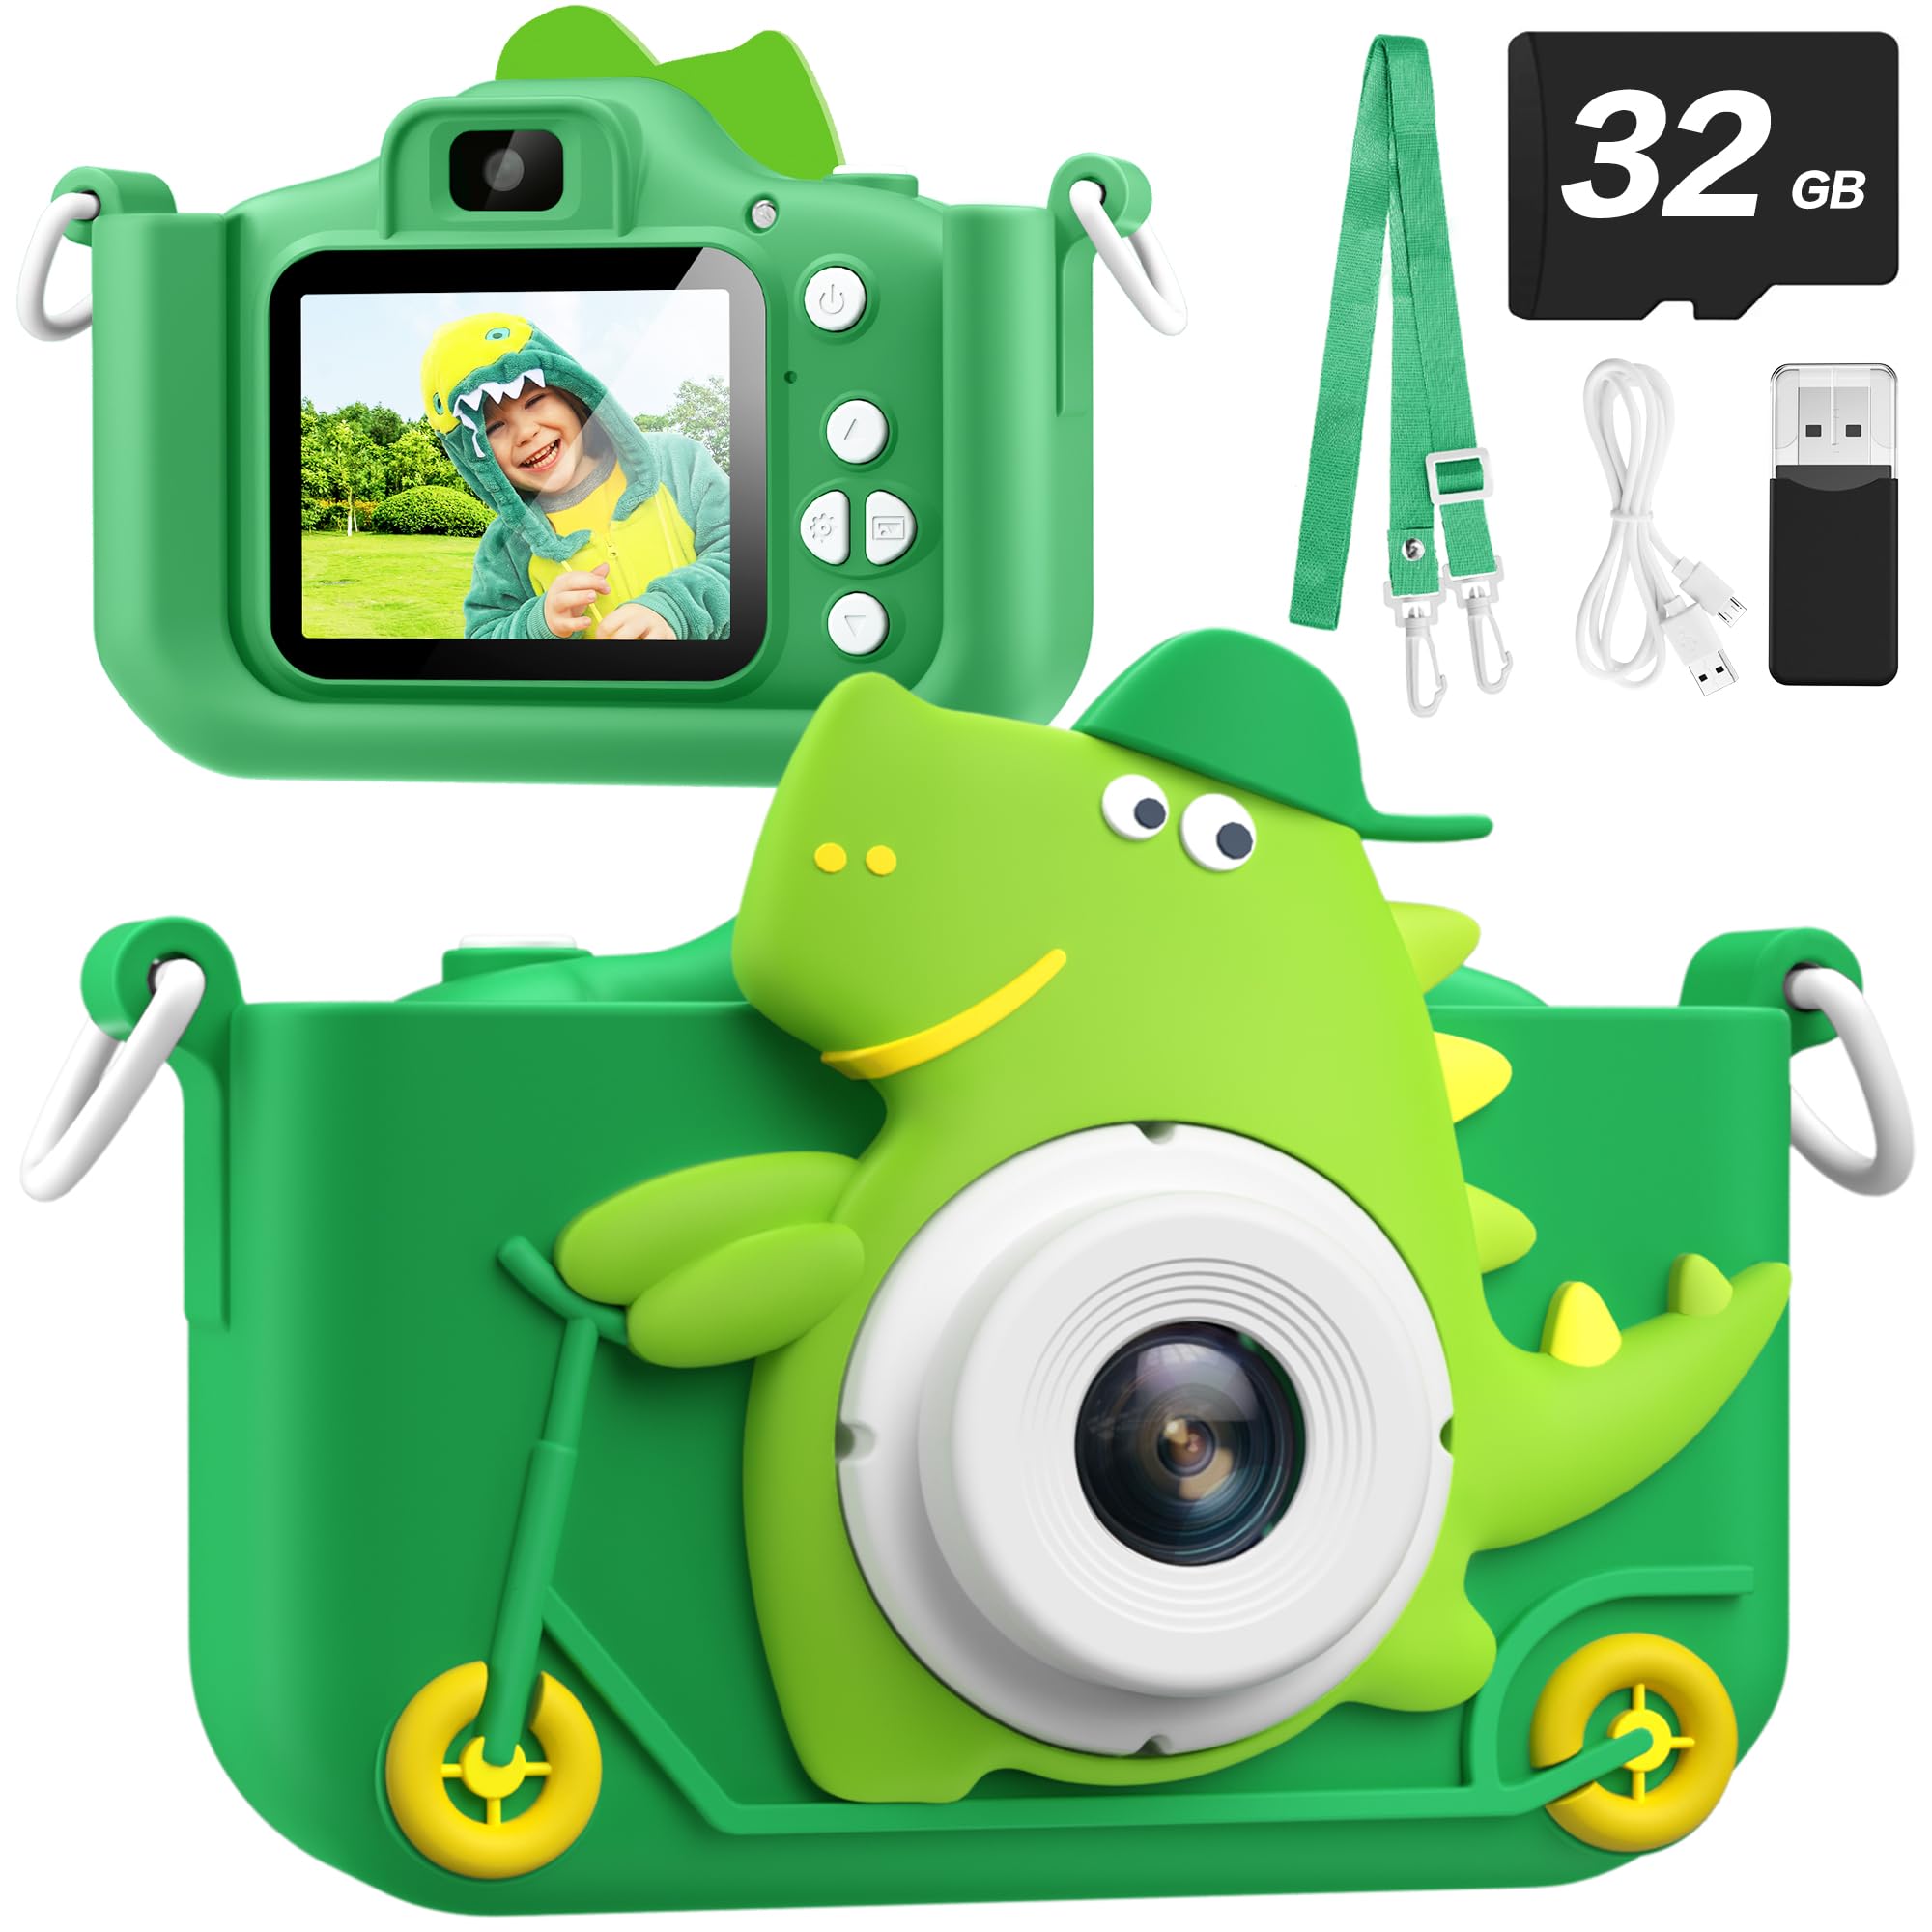 Upgrade Dinosaur Kids Camera for 3-12 Year Old Boys Girls, Christmas Birthday Gifts for Kids, 1080P HD Kids Digital Video Camera with 32GB SD Card, Multi-Functional Cute Portable Kids Toys